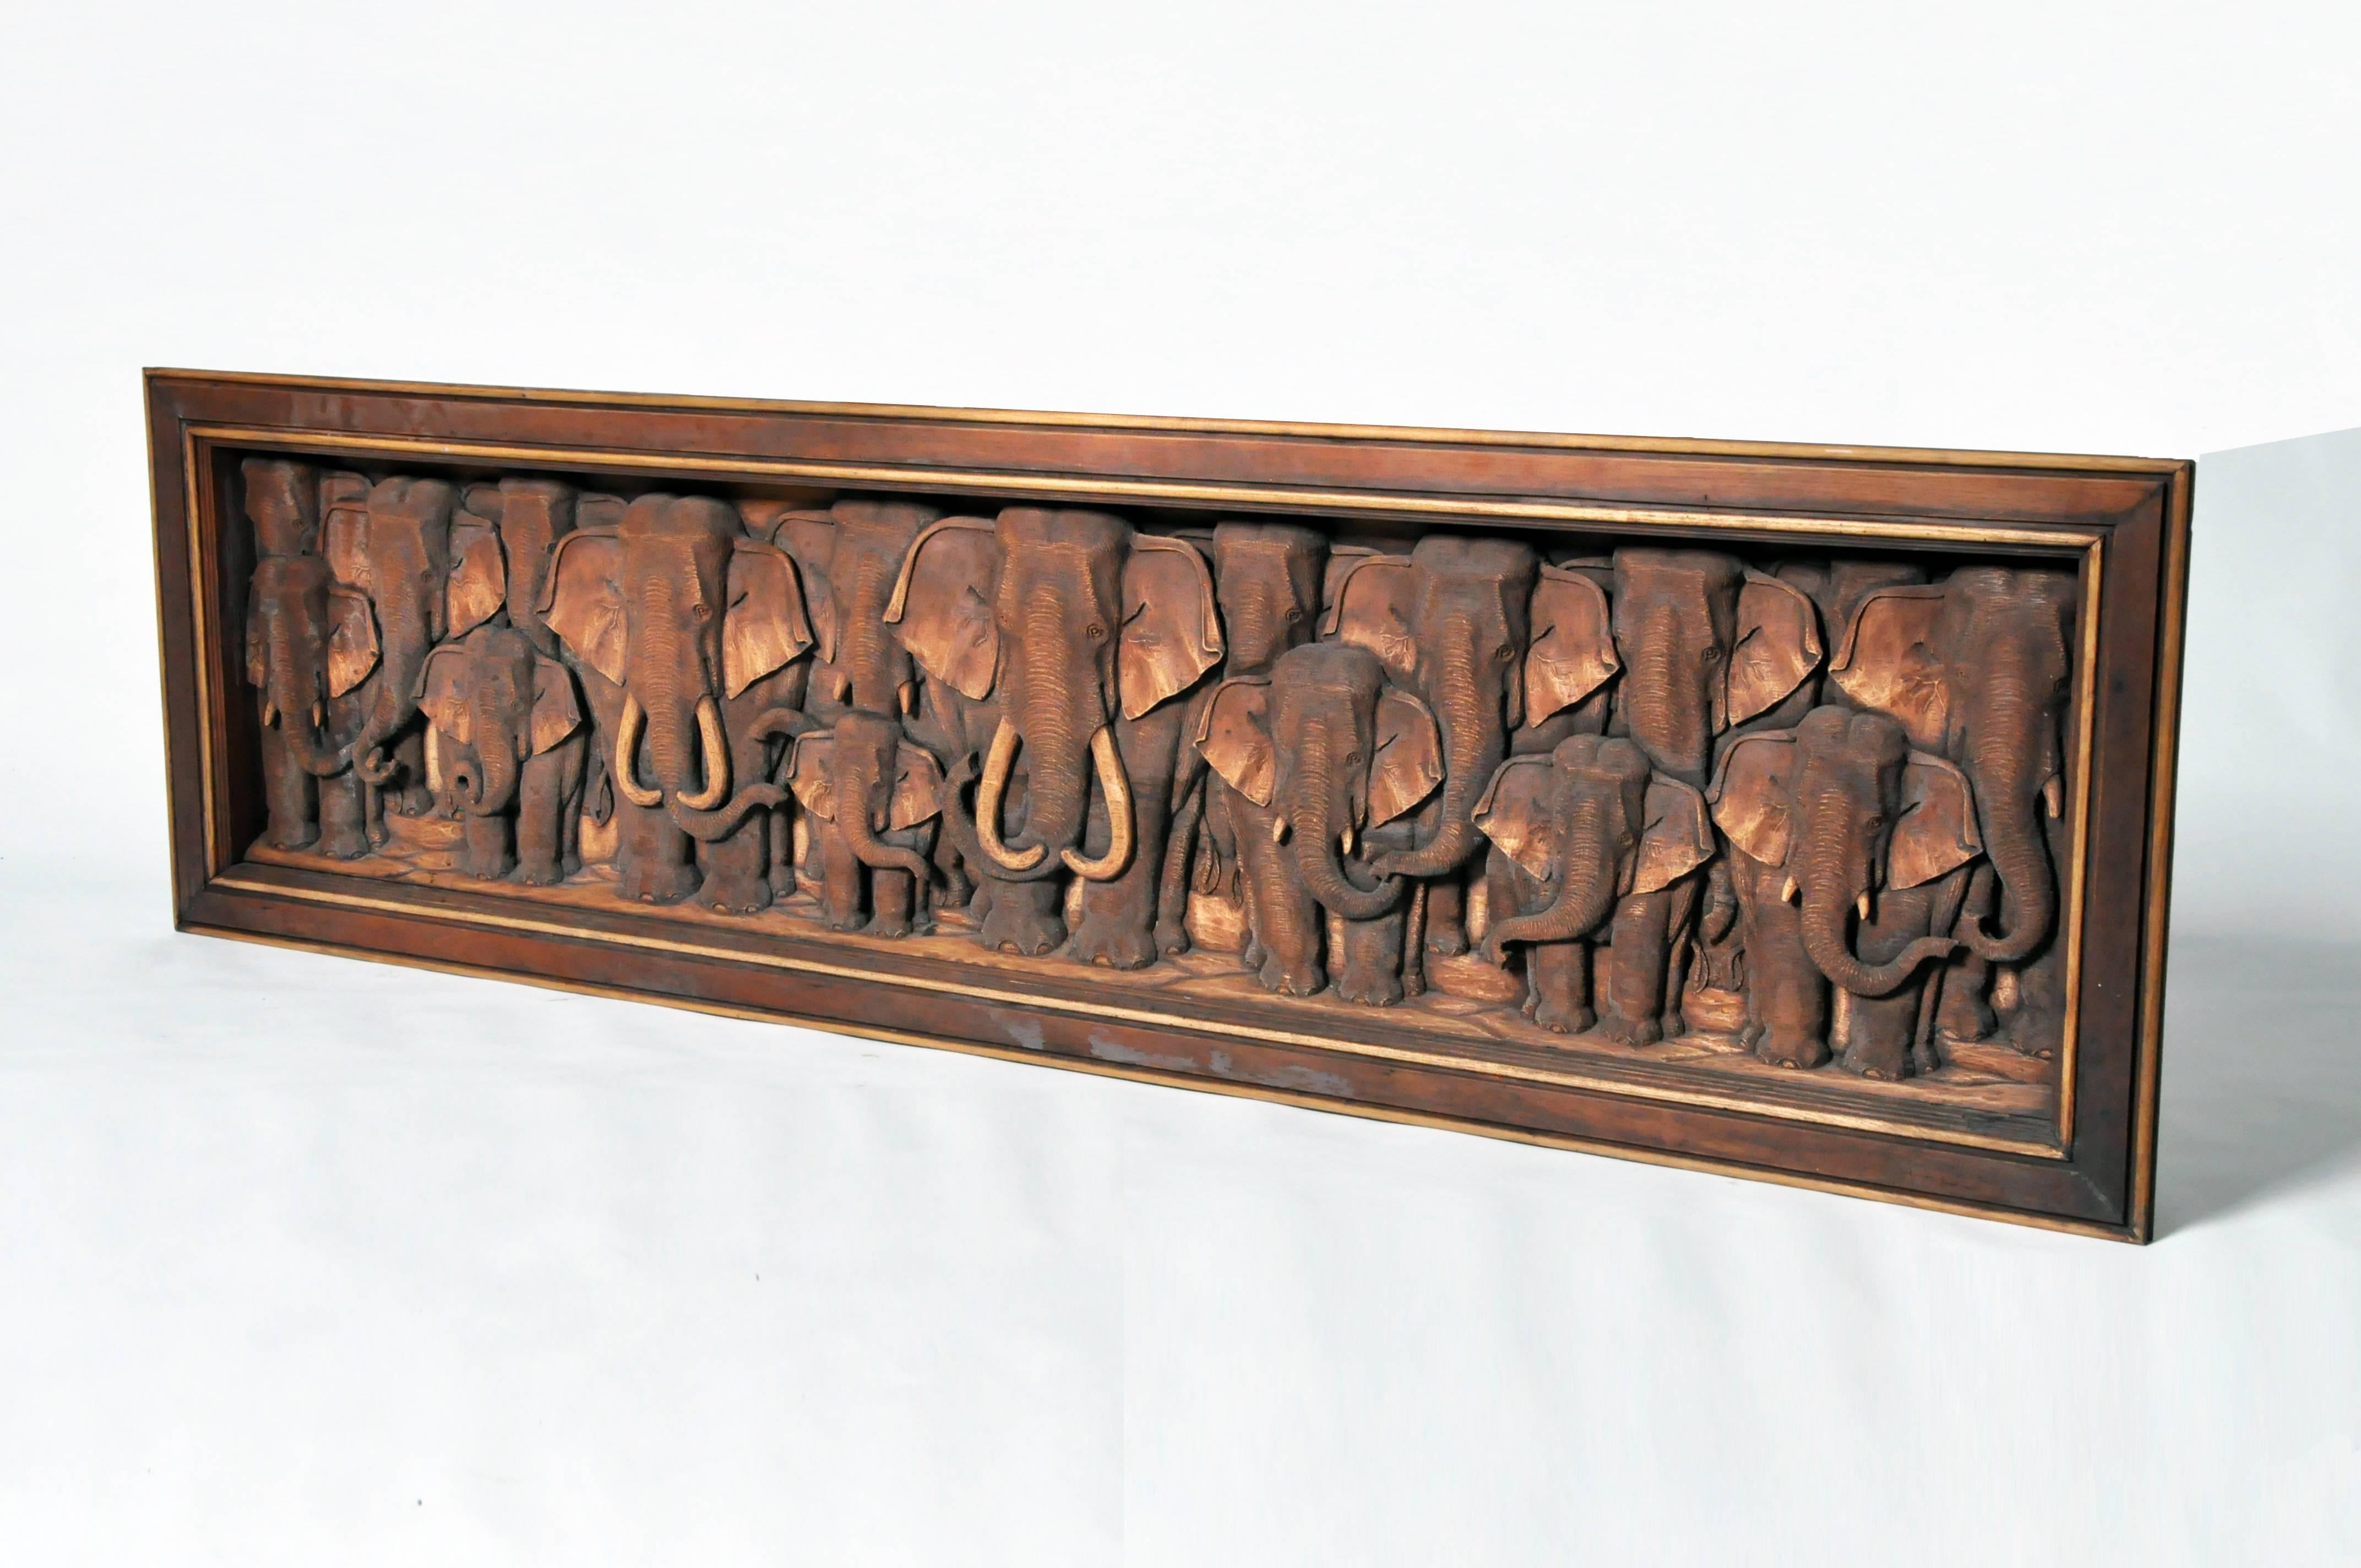 This recently hand-carved wall sculptures depicts a herd of elephants. It is from Thailand and is made from teakwood.